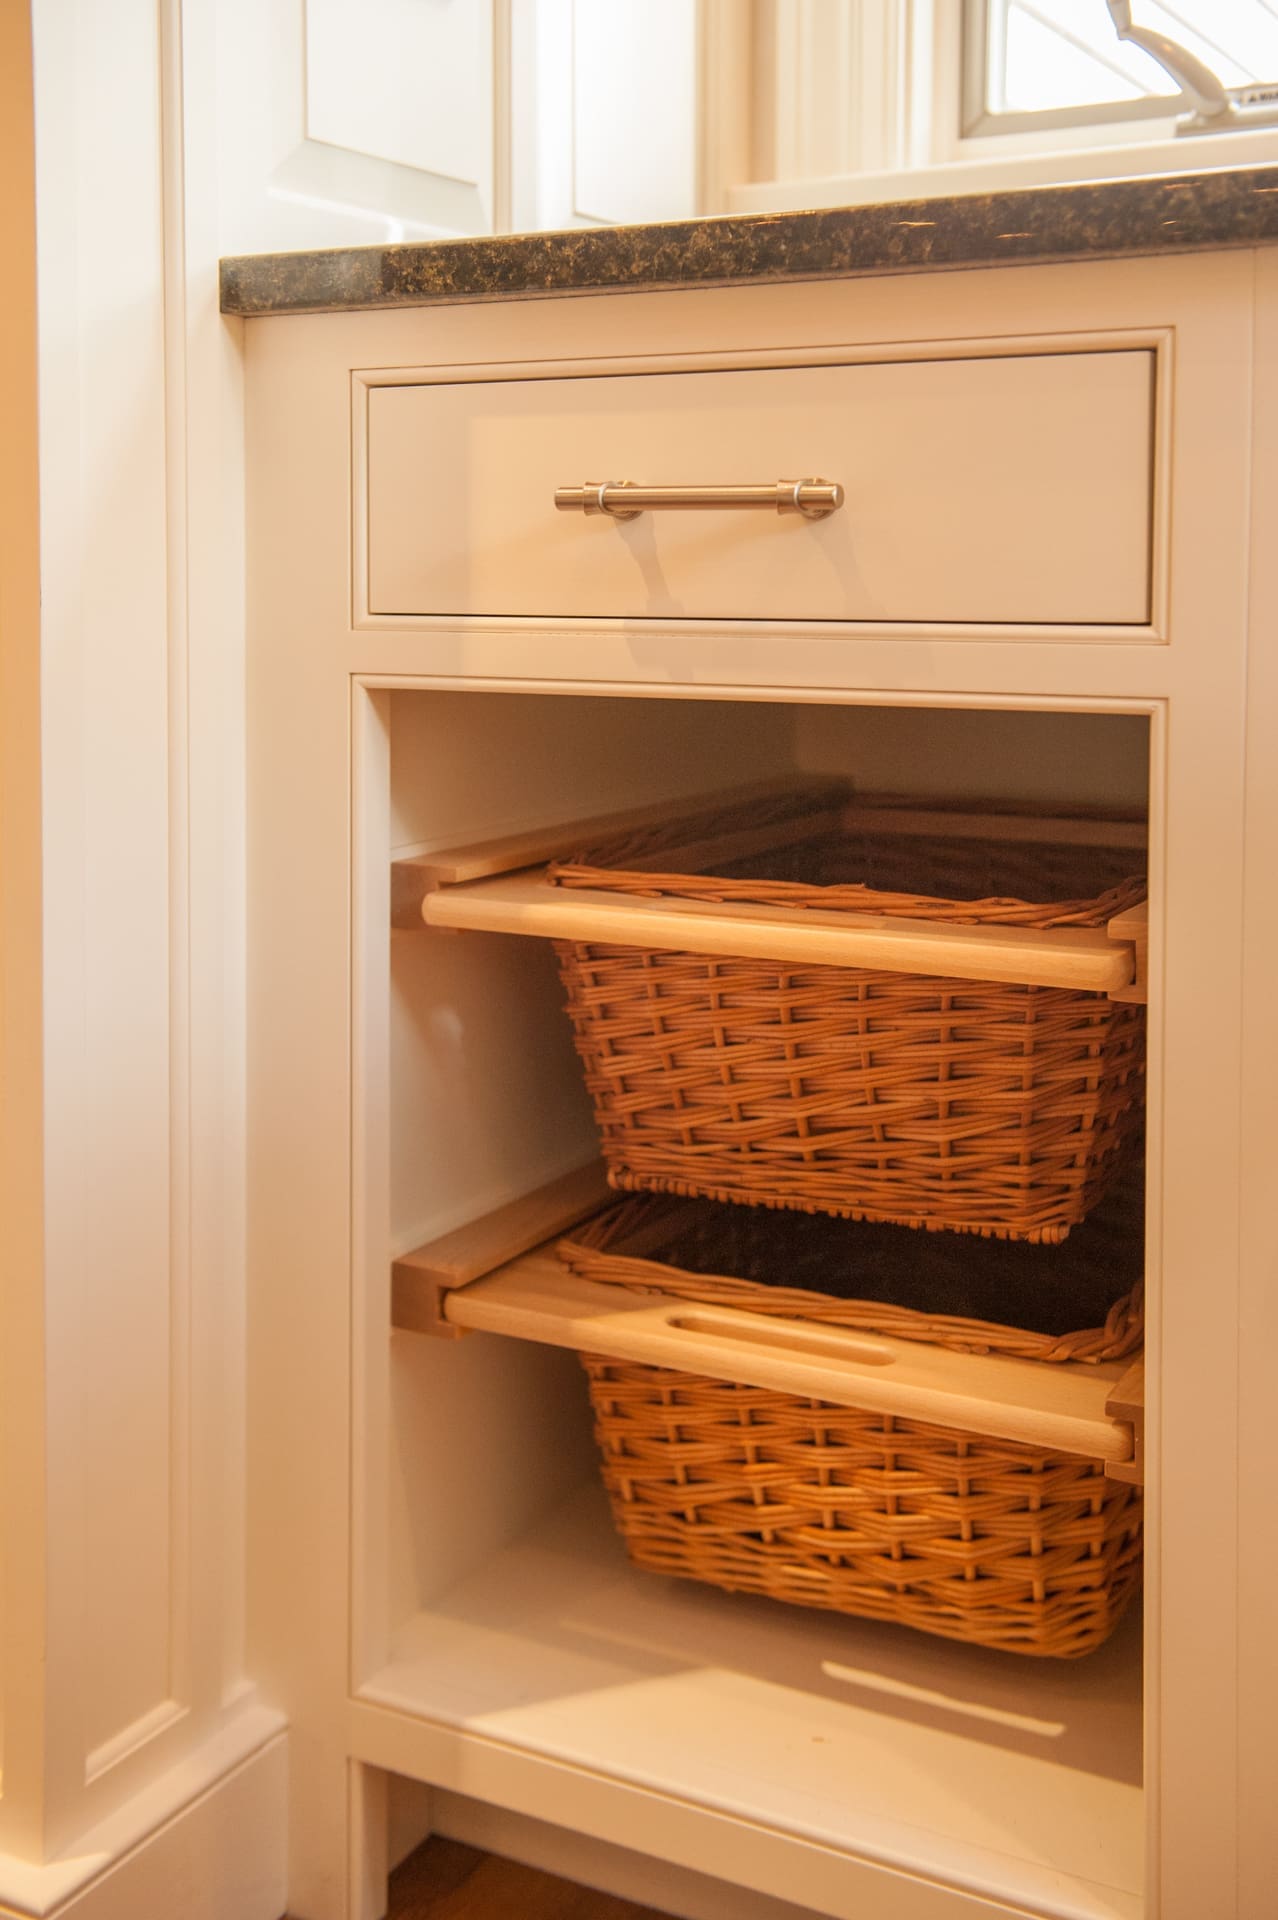 A photo of a cabinet with exposed pull-out wicker basket drawers.